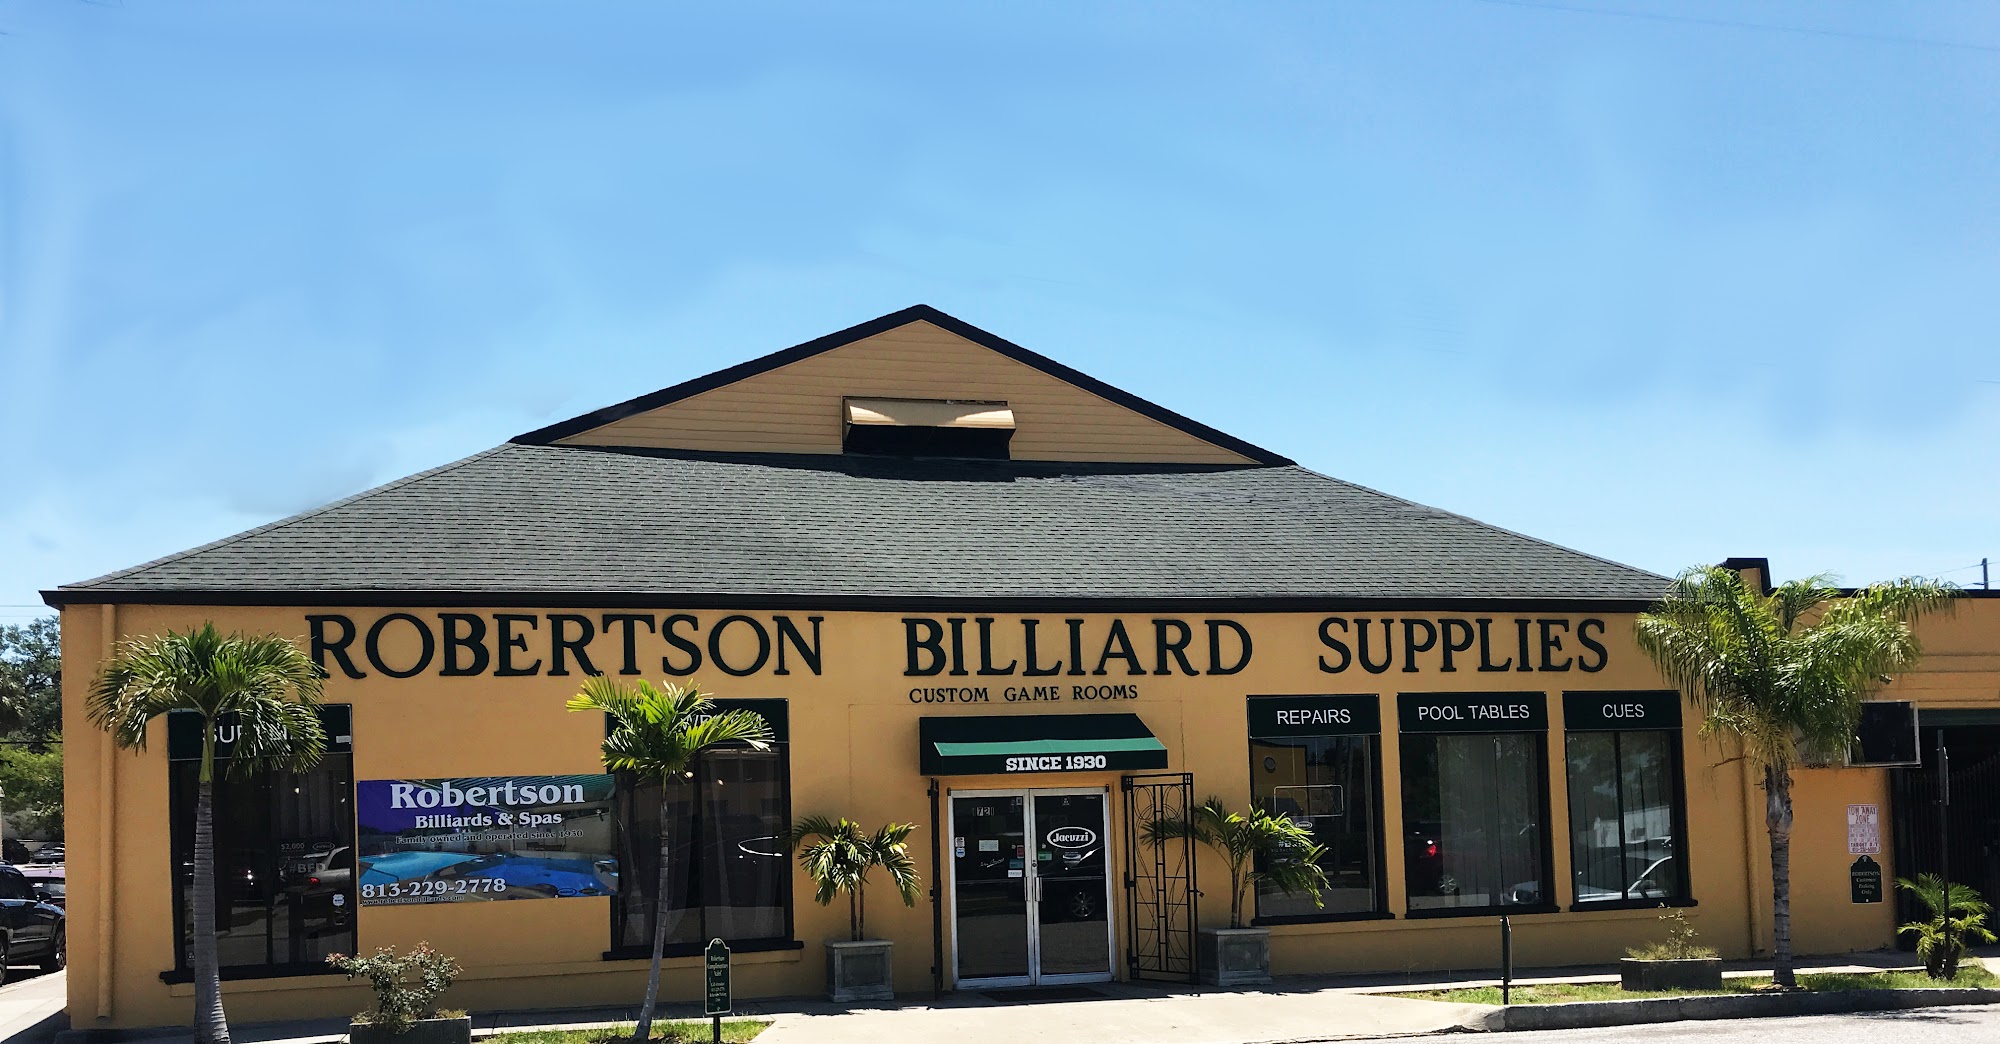 Hot Tubs & Billiards By Robertson's